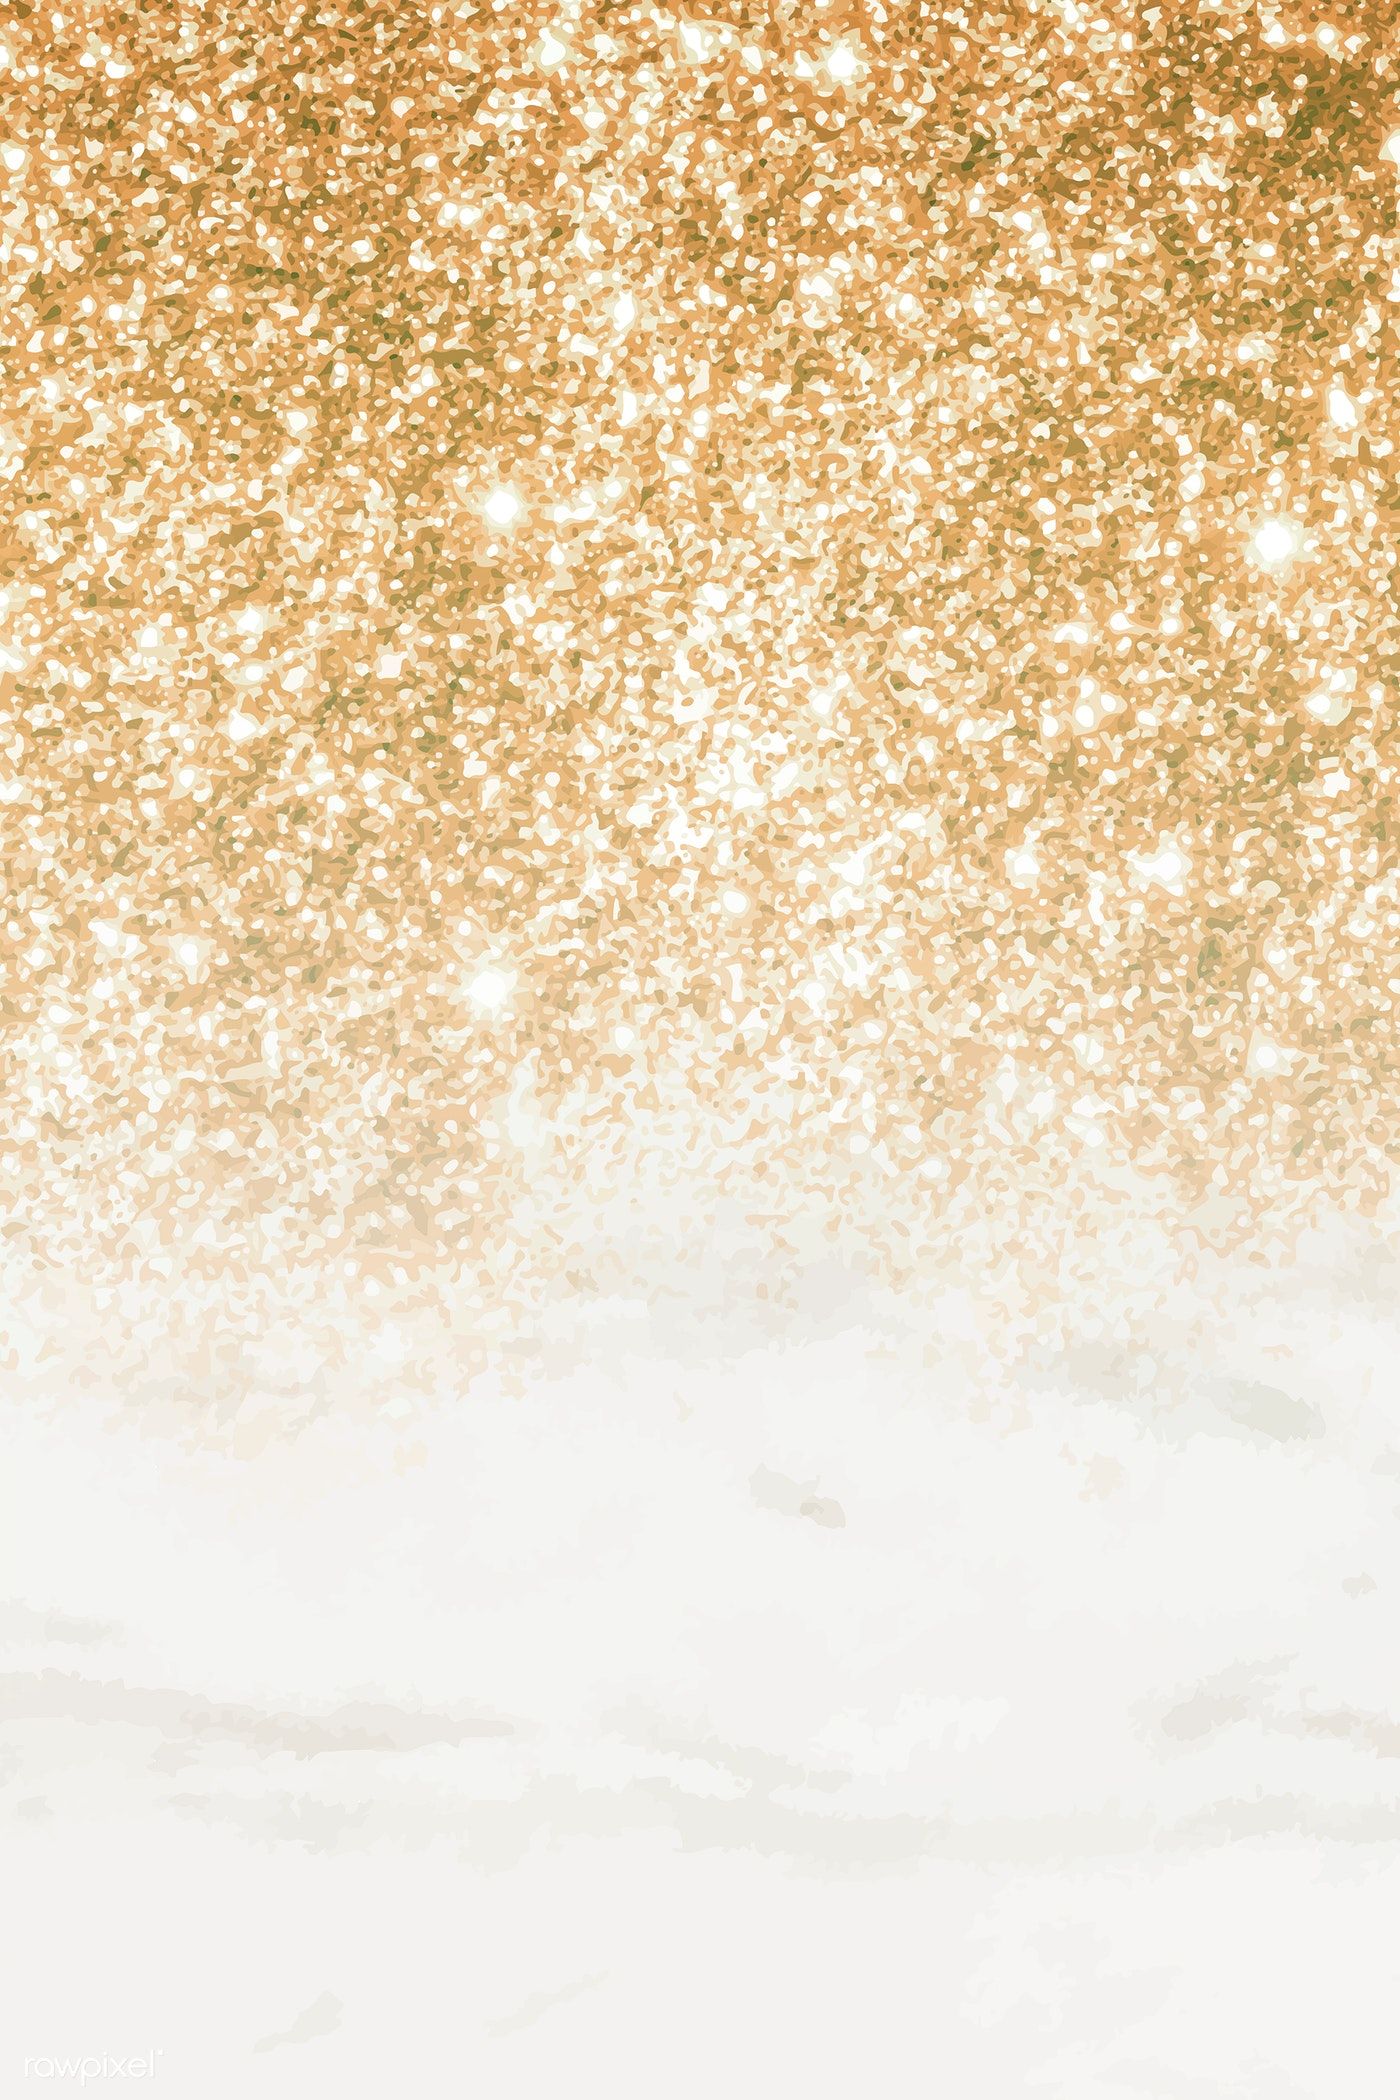 Gold To White Glitter iPhone Wallpaper